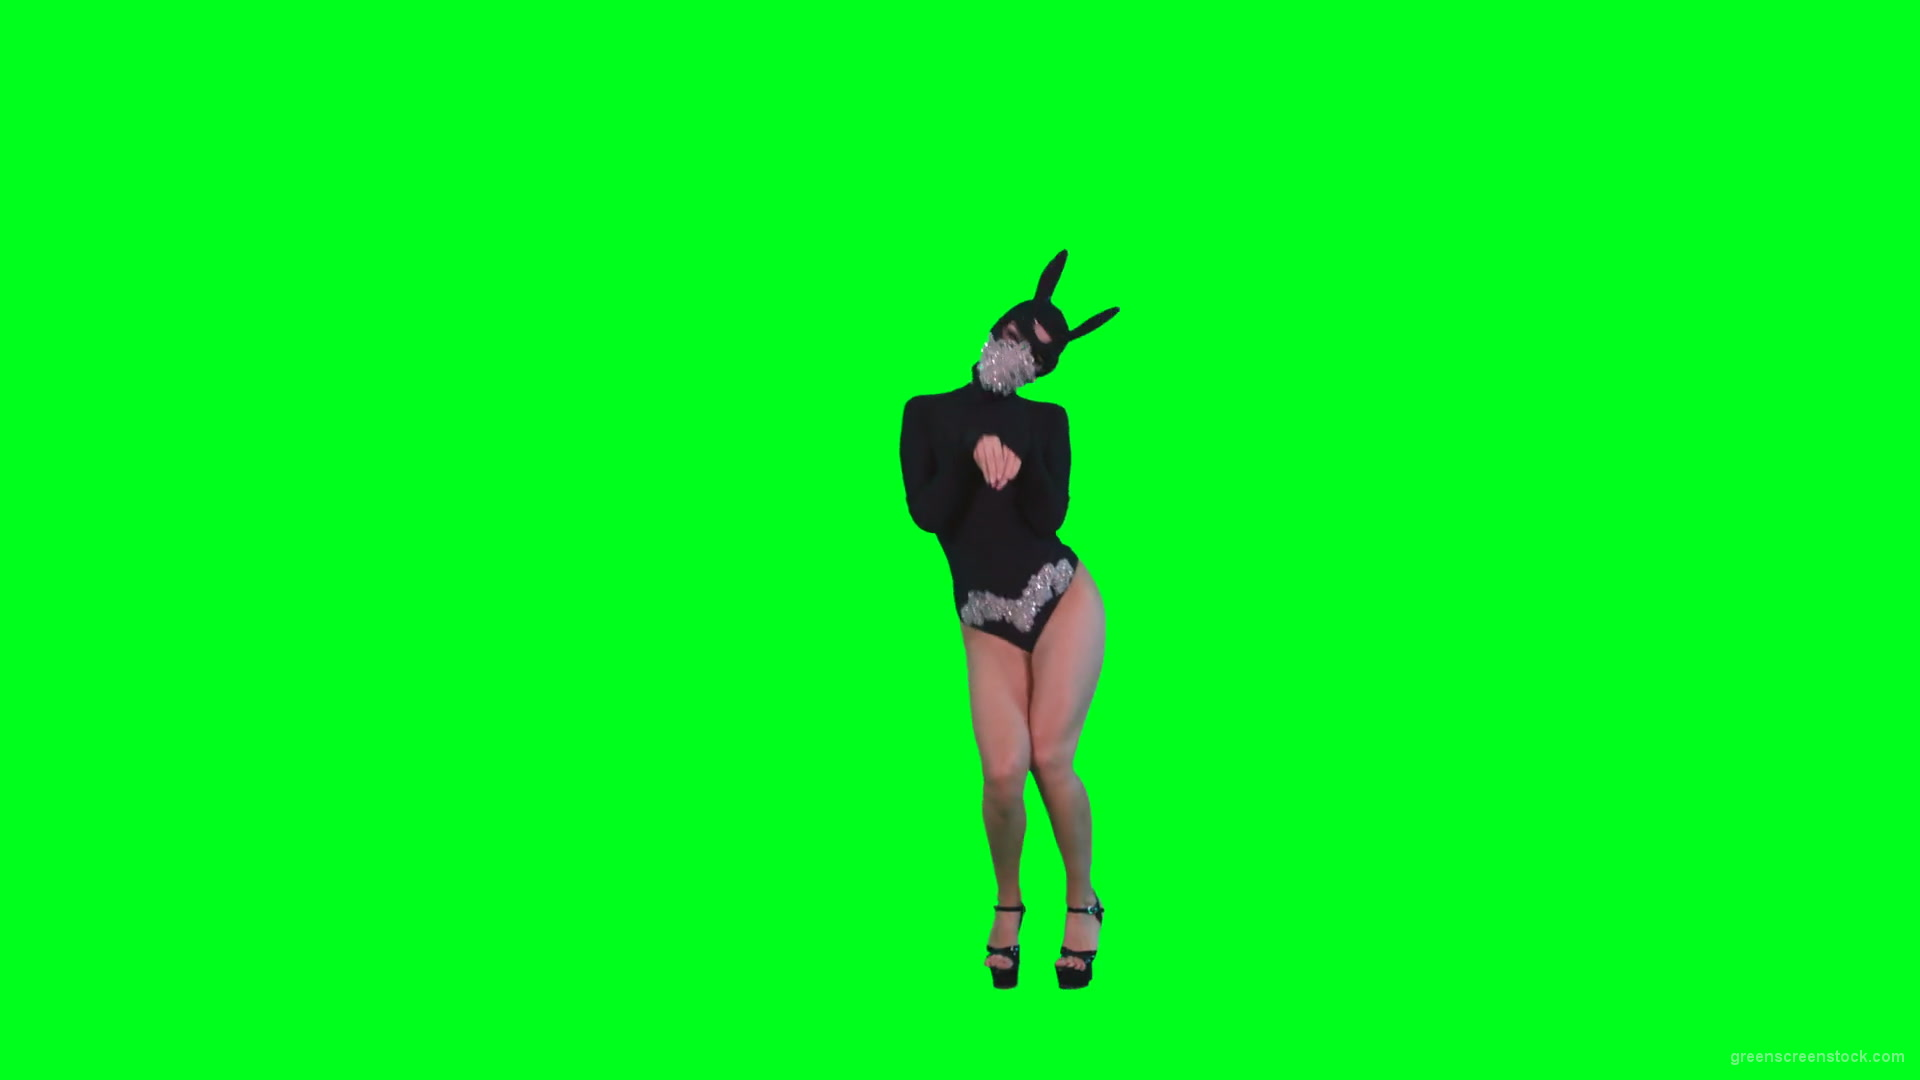 Go-Go-Dancing-Girl-in-Rabbit-Mask-jumping-in-black-costume-on-Green-Screen-4K-Video-Footage-1920_007 Green Screen Stock